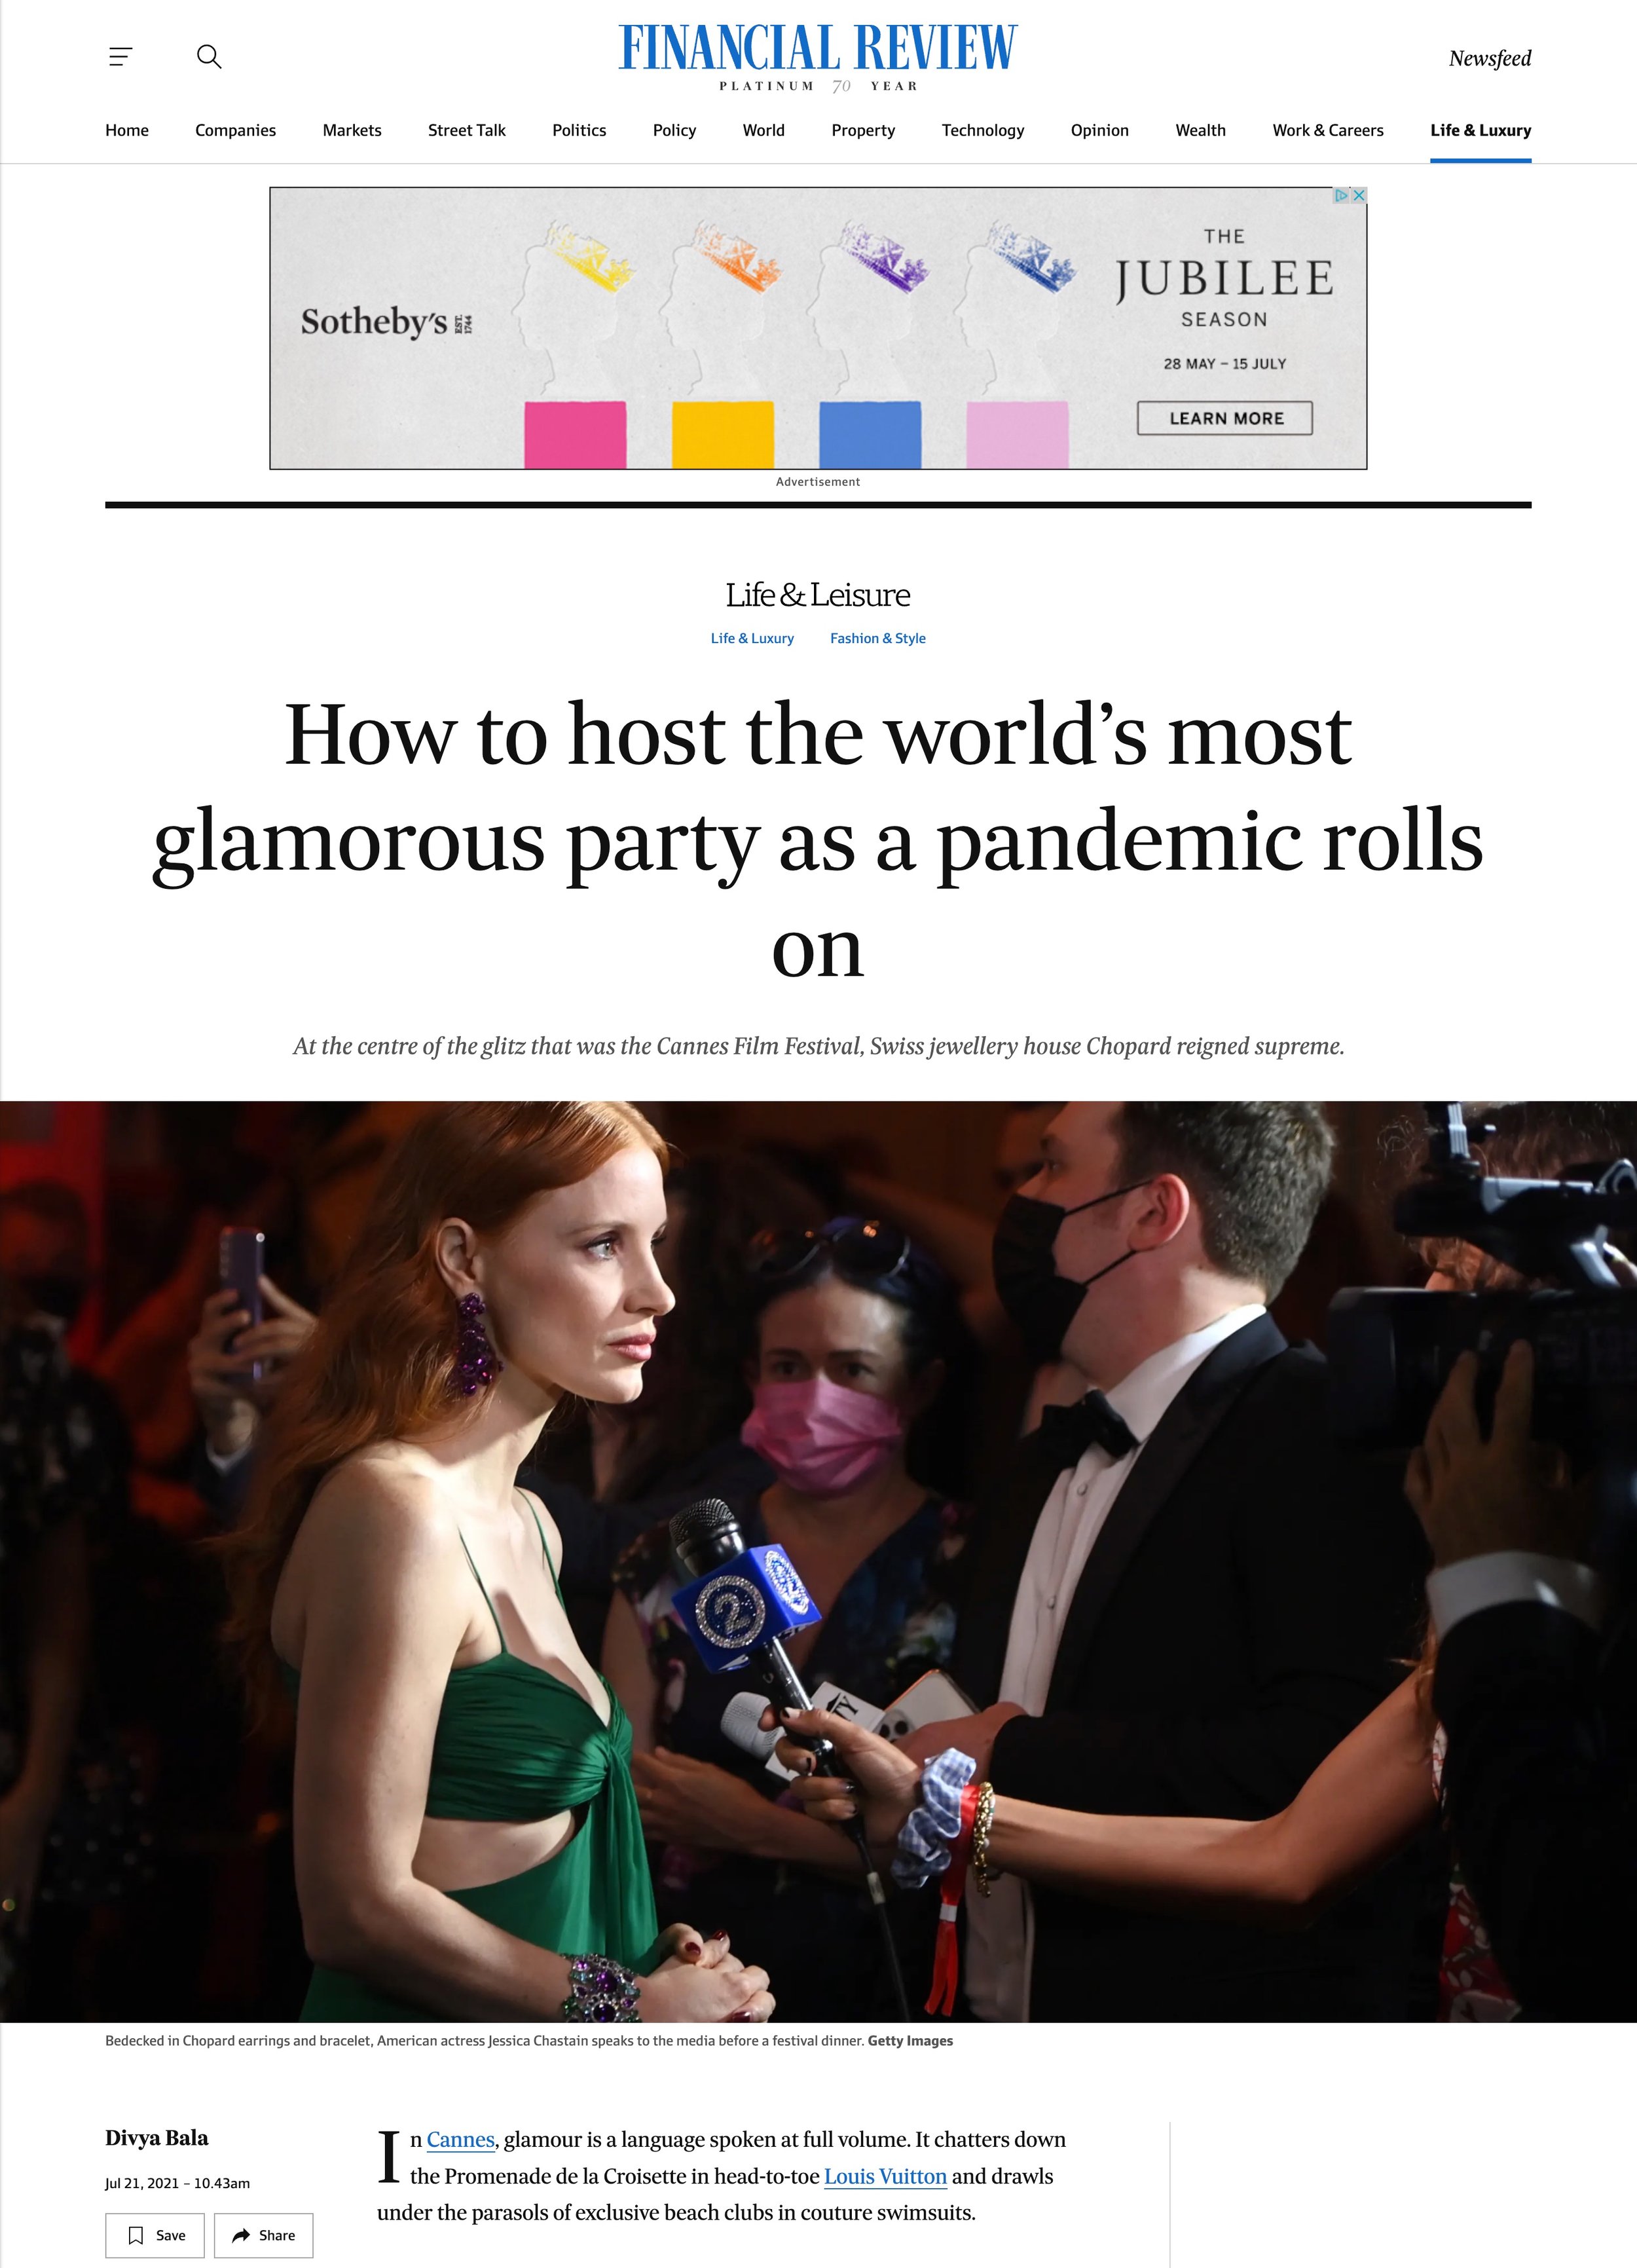 screencapture-afr-life-and-luxury-fashion-and-style-how-to-host-the-world-s-most-glamorous-party-as-a-pandemic-rolls-on-20210719-p58b01-2022-05-16-15_42_29-1.jpg